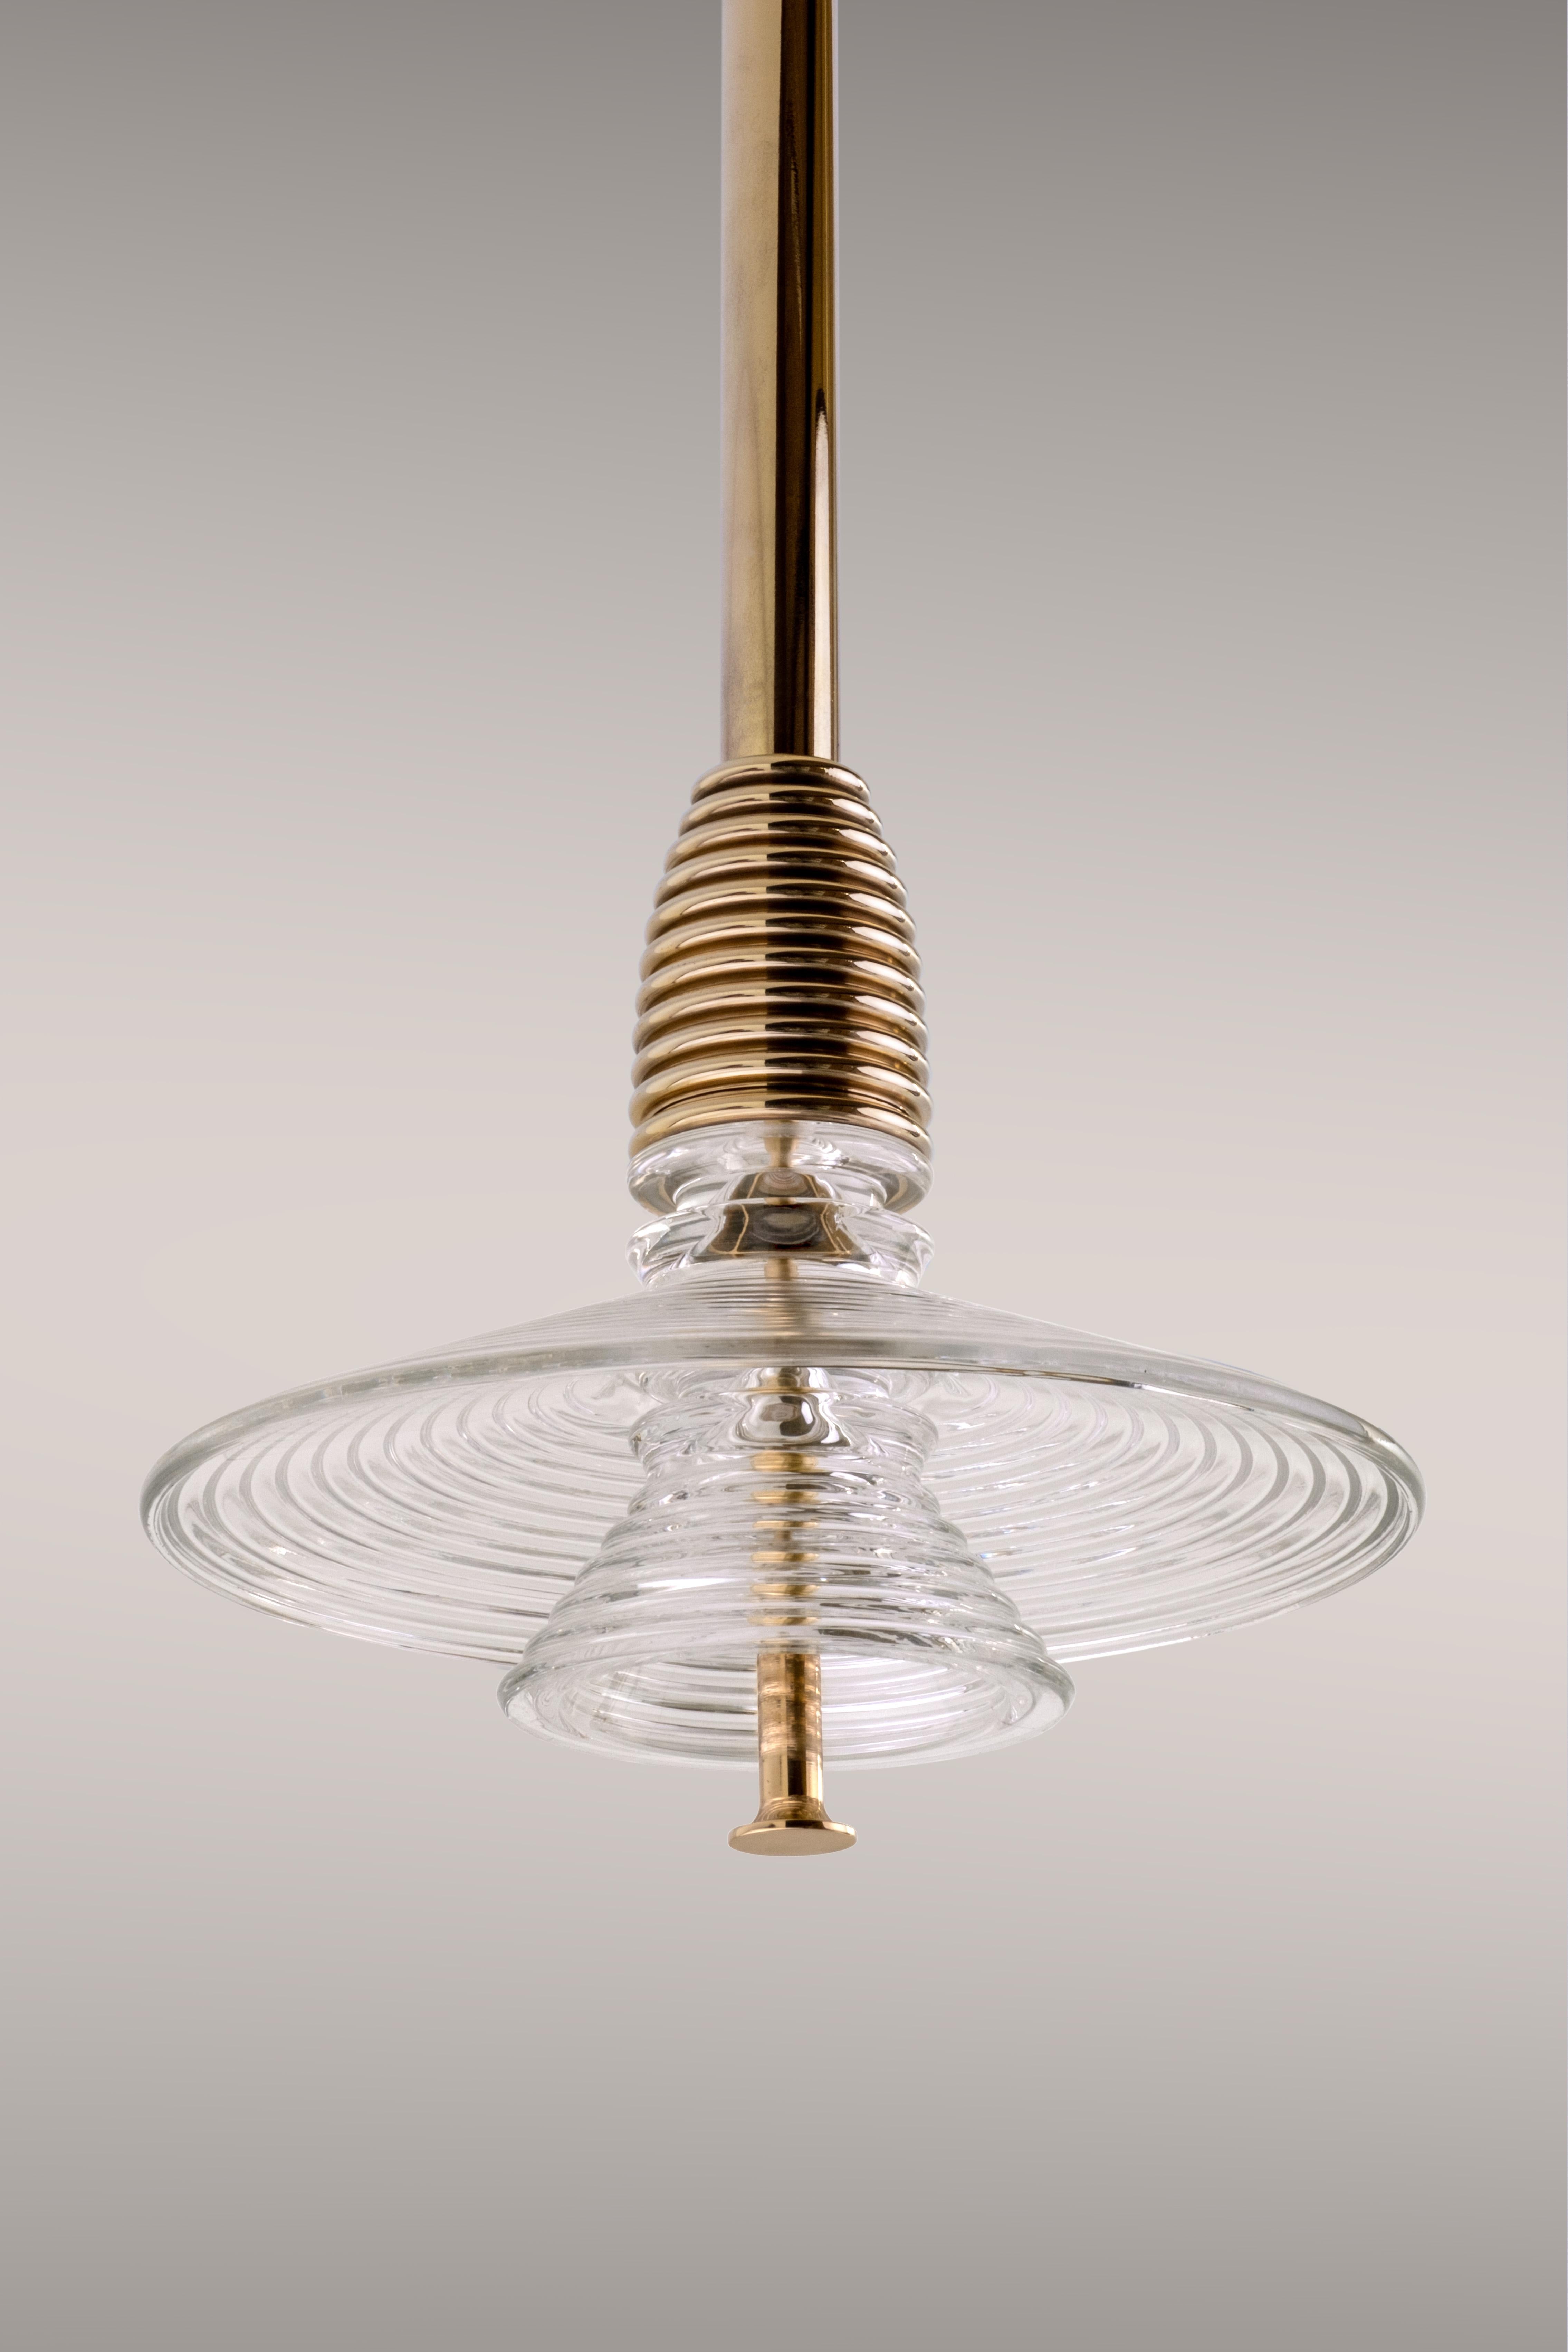 Streamlined Moderne The Insulator 'AB' Pendant in dark brass and clear glass by NOVOCASTRIAN deco For Sale